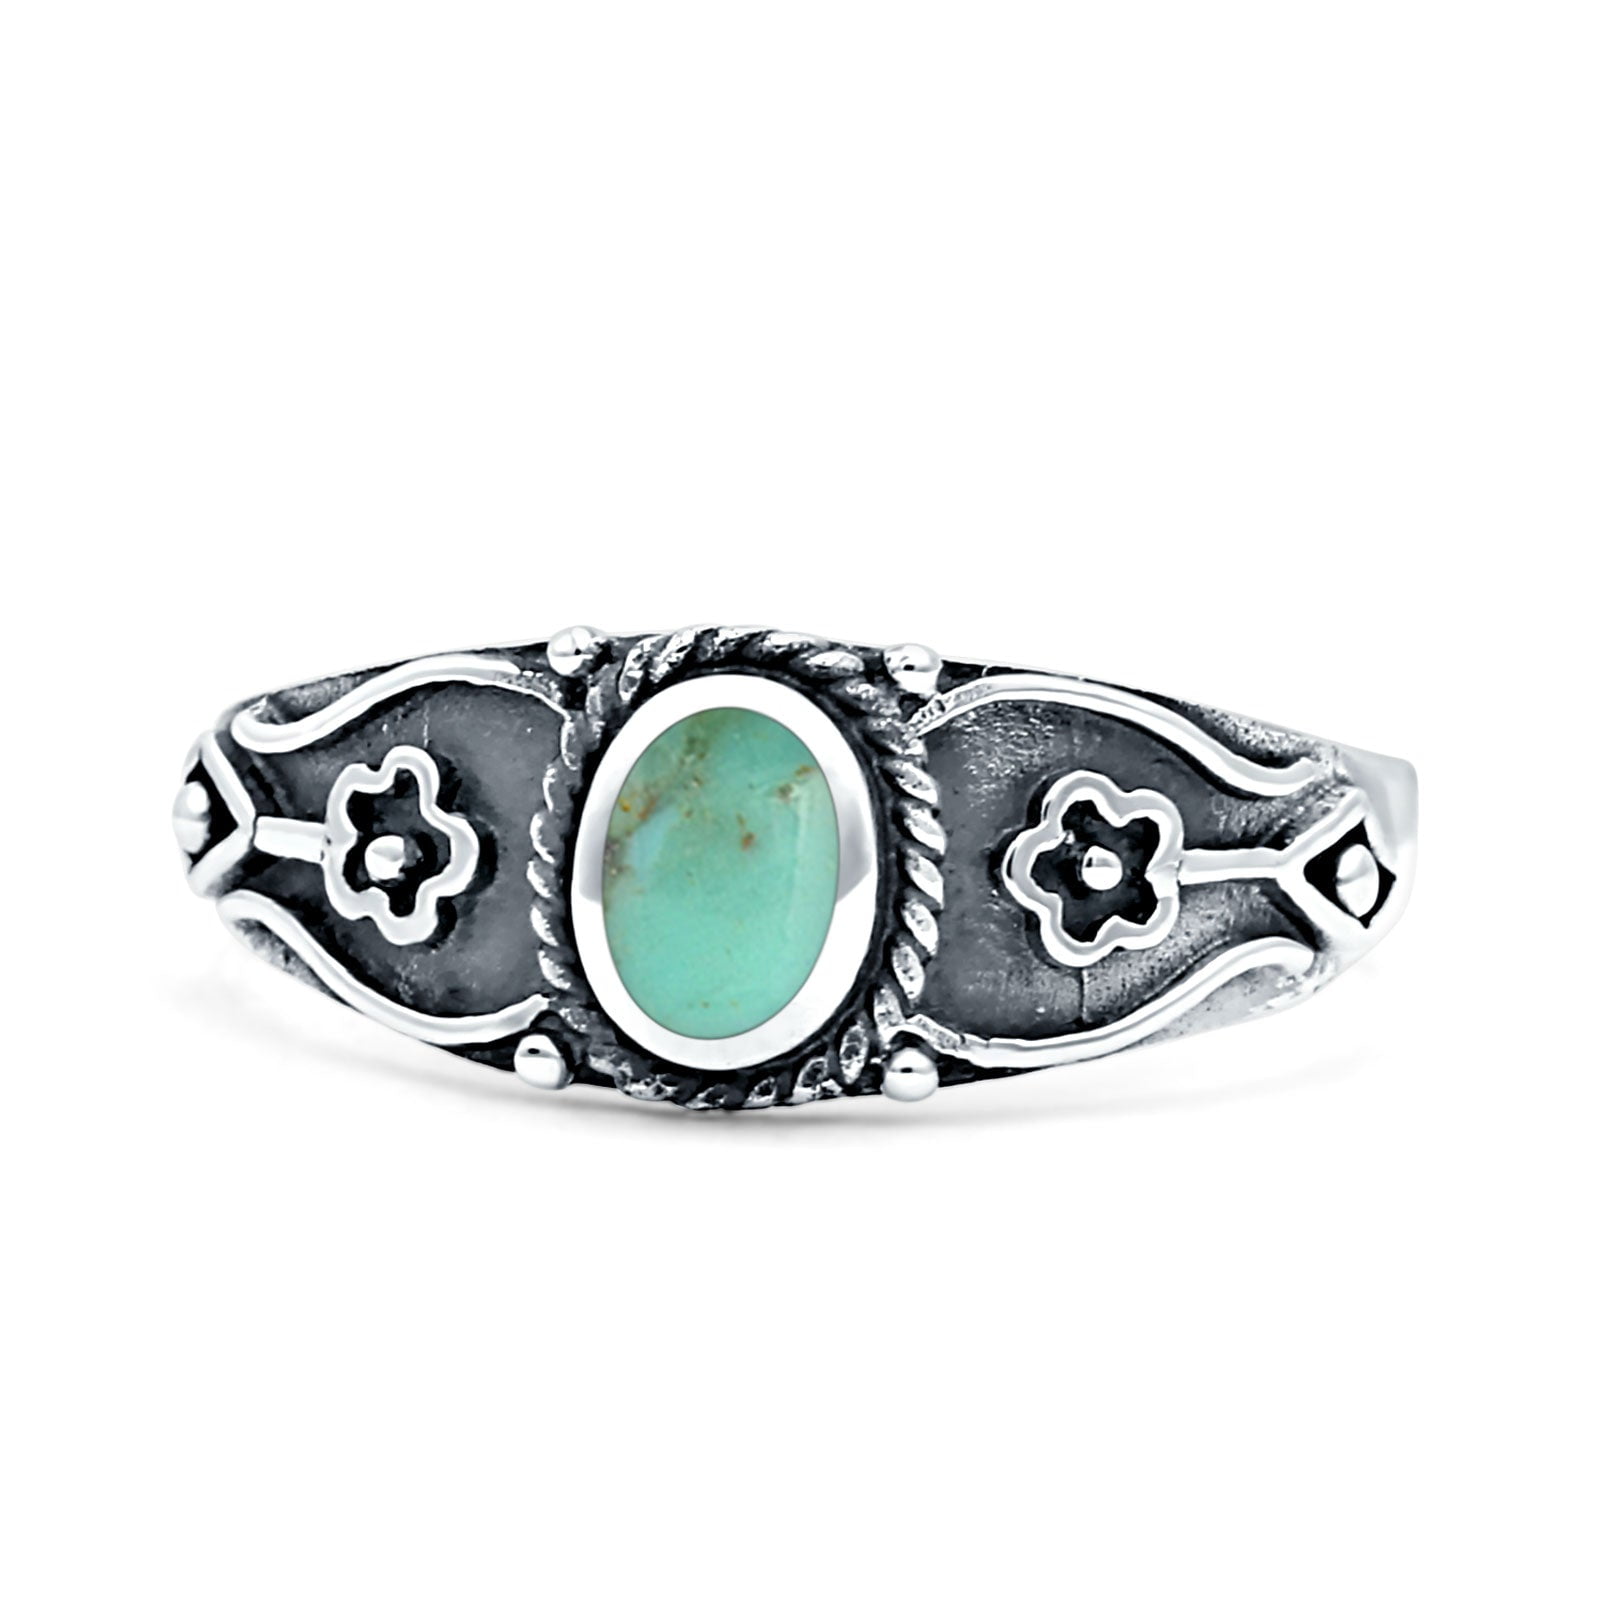 Vintage Style Flower Design Oval Fashion Turquoise Ring Band 925 Sterling  Silver Size 7